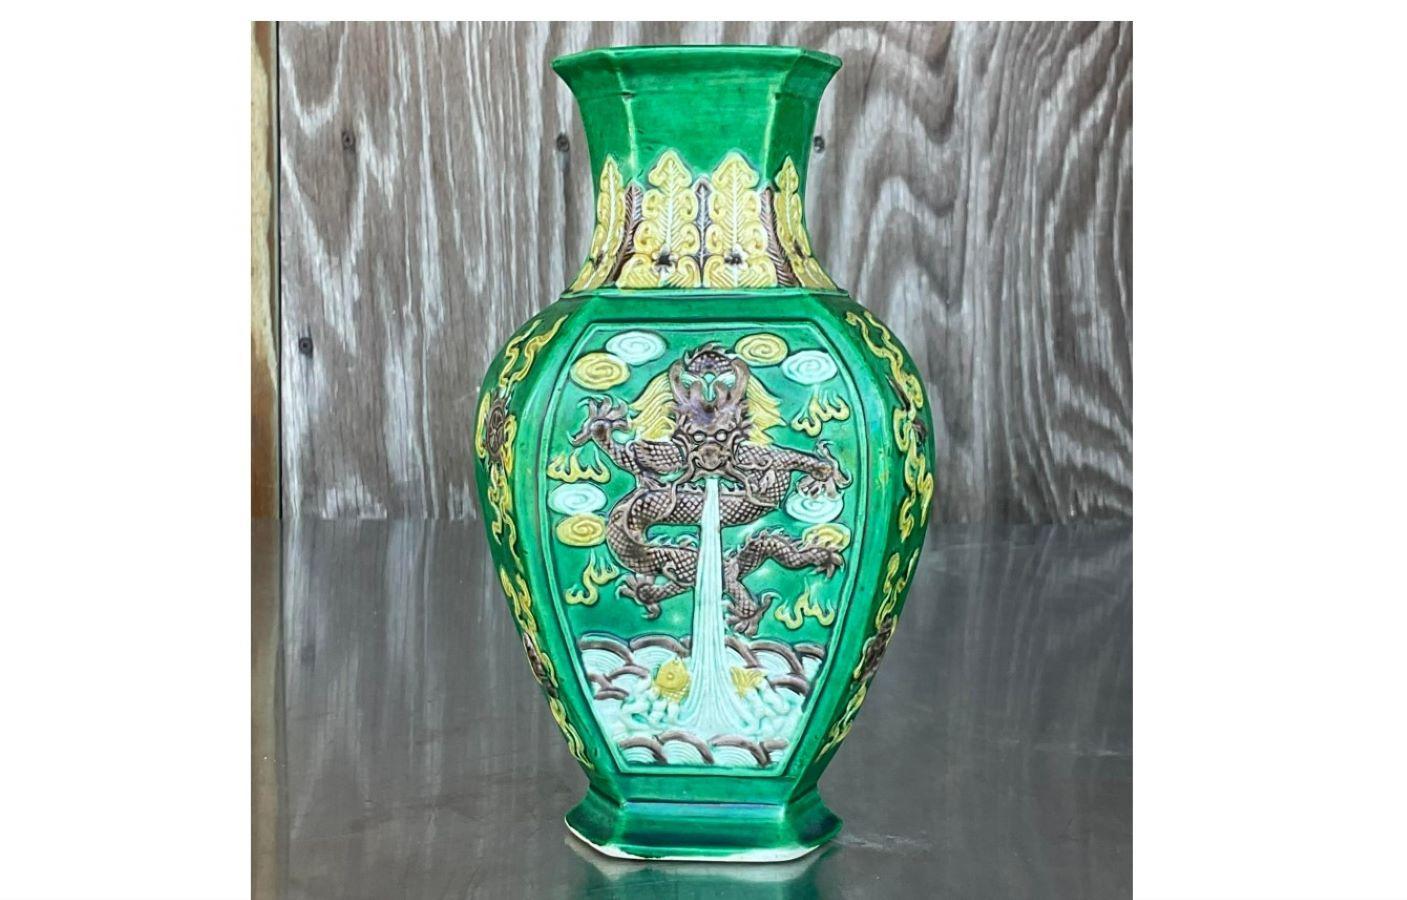 A fabulous vintage 1920s Asian vase. A chic green and yellow form with a dragon motif. Stamped on the bottom. Acquired from a Palm Beach estate. 